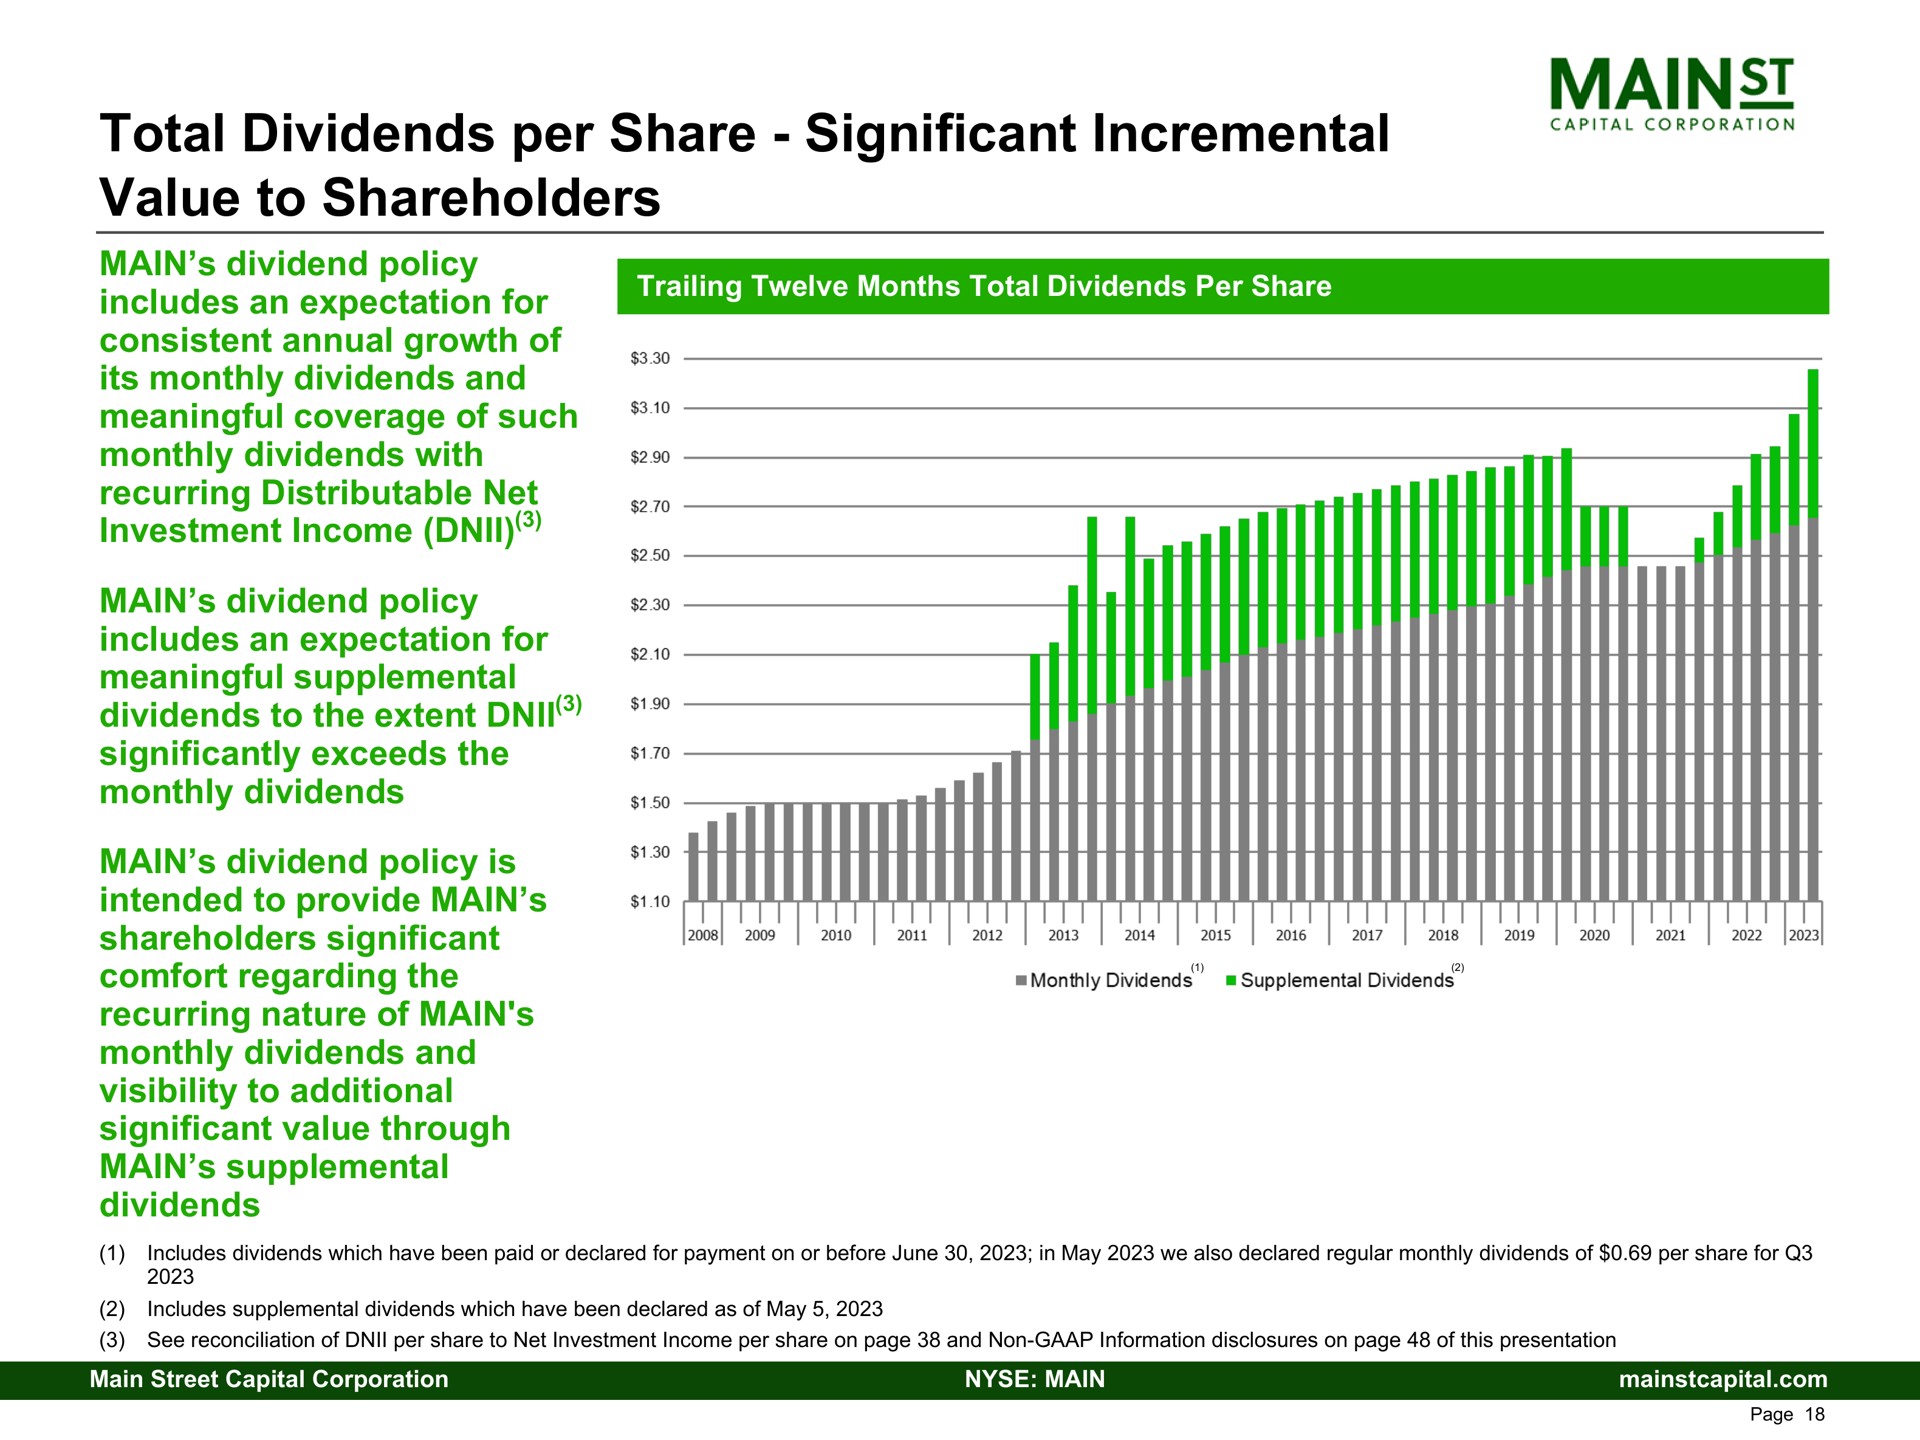 total dividends per share significant incremental value to shareholders the extent main is teeth | Main Street Capital